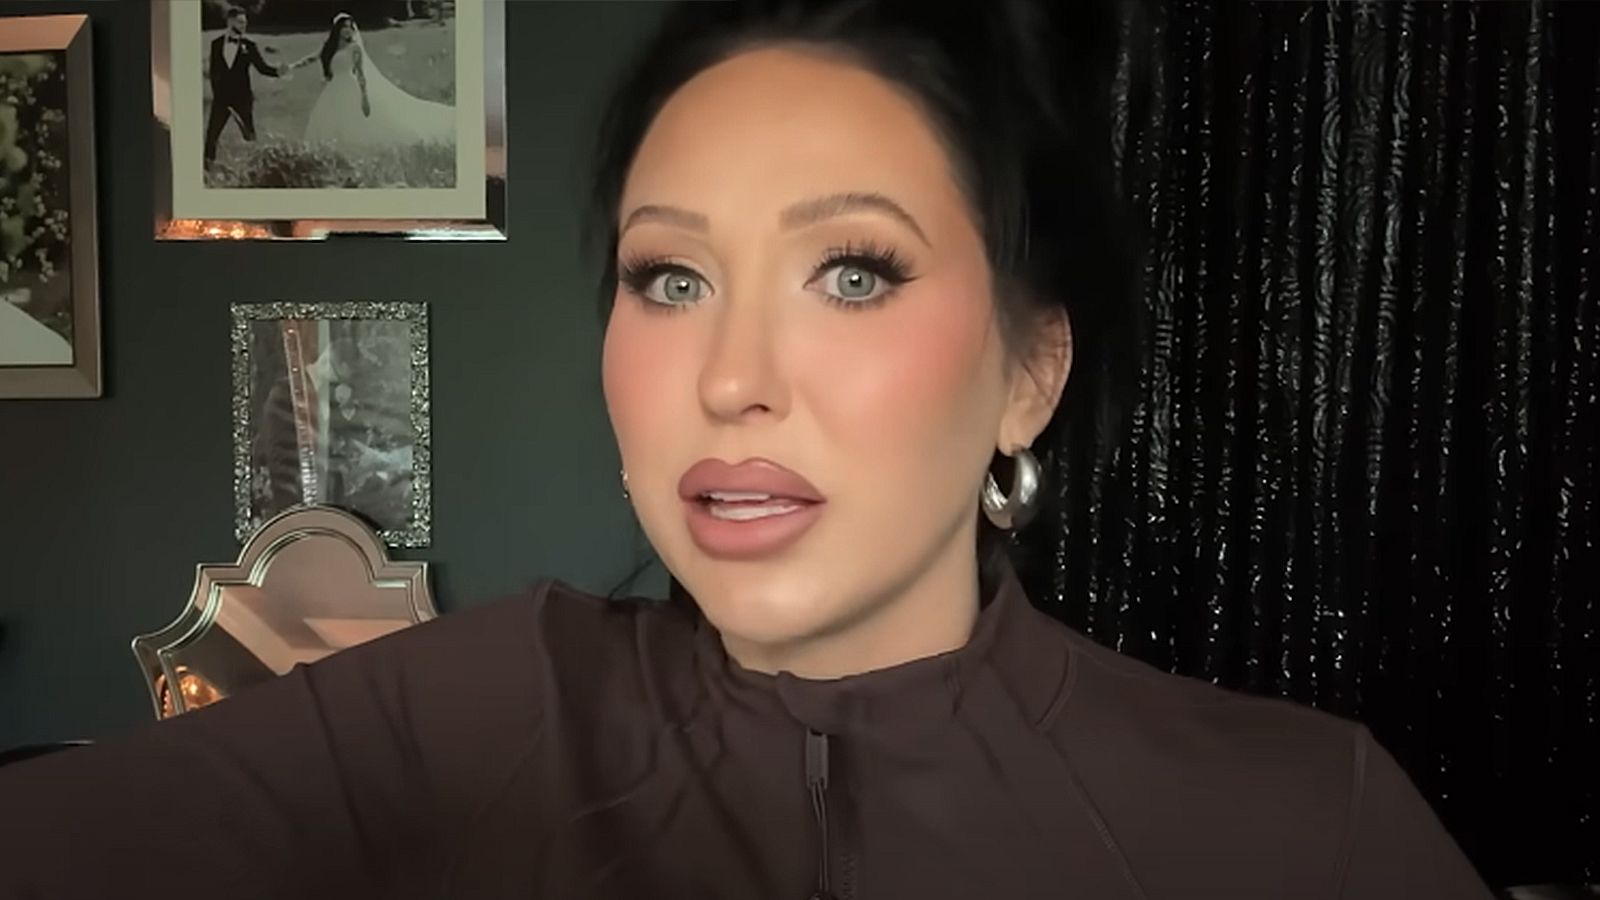 Influencer Jaclyn Hill's Makeup Brand Jaclyn Cosmetics Closes